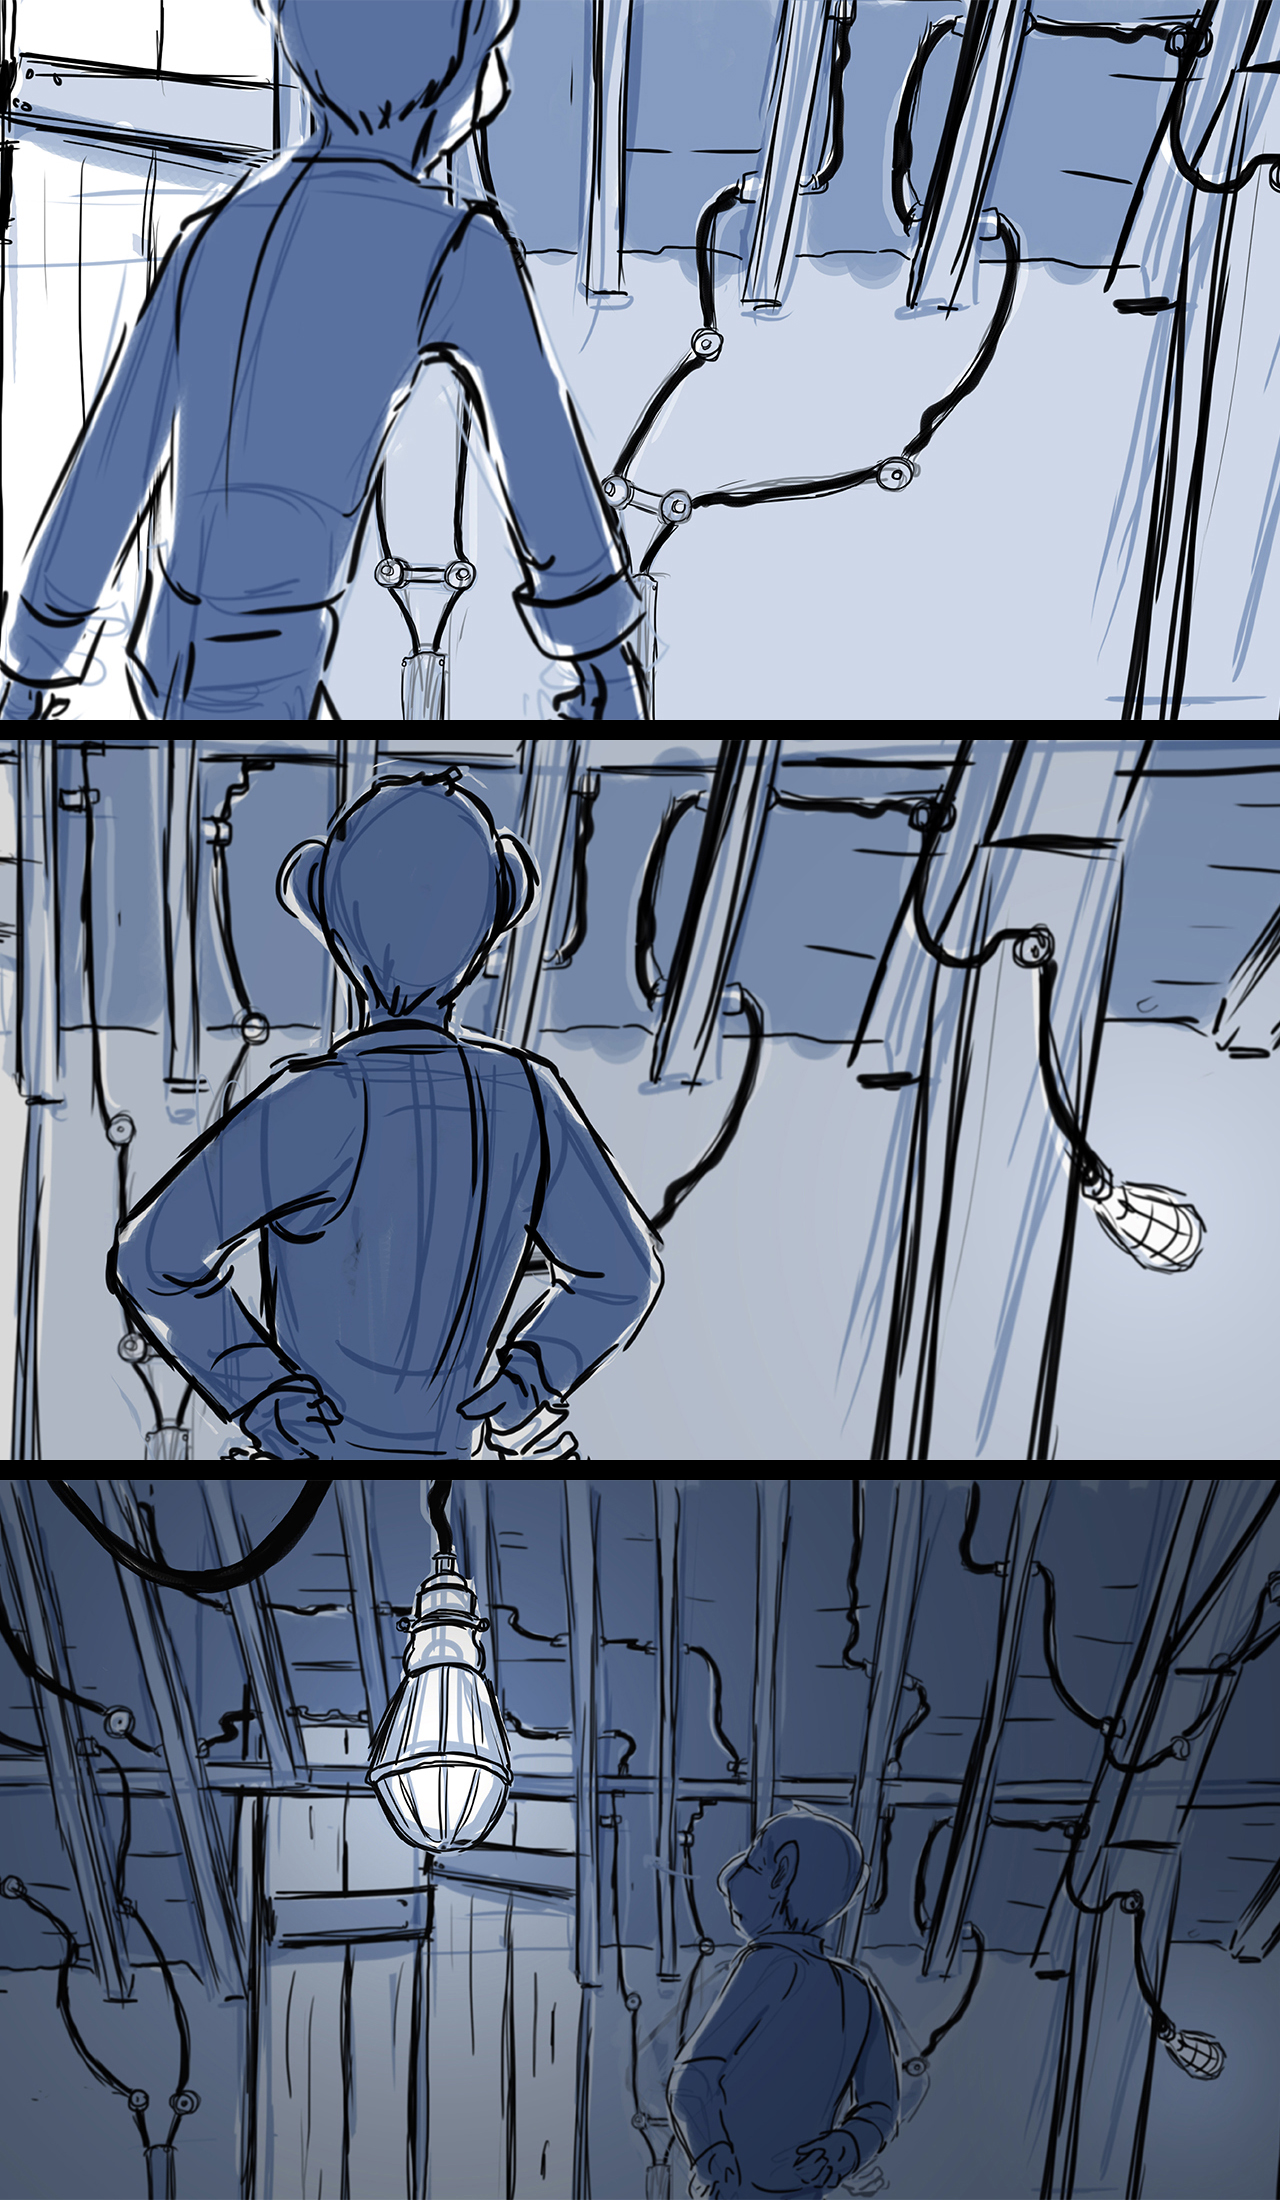 Storyboard sequence from an animated film. Sequence shows man walking into abstract shot.  There's lots of exposed wire and a lightbulb in shot.